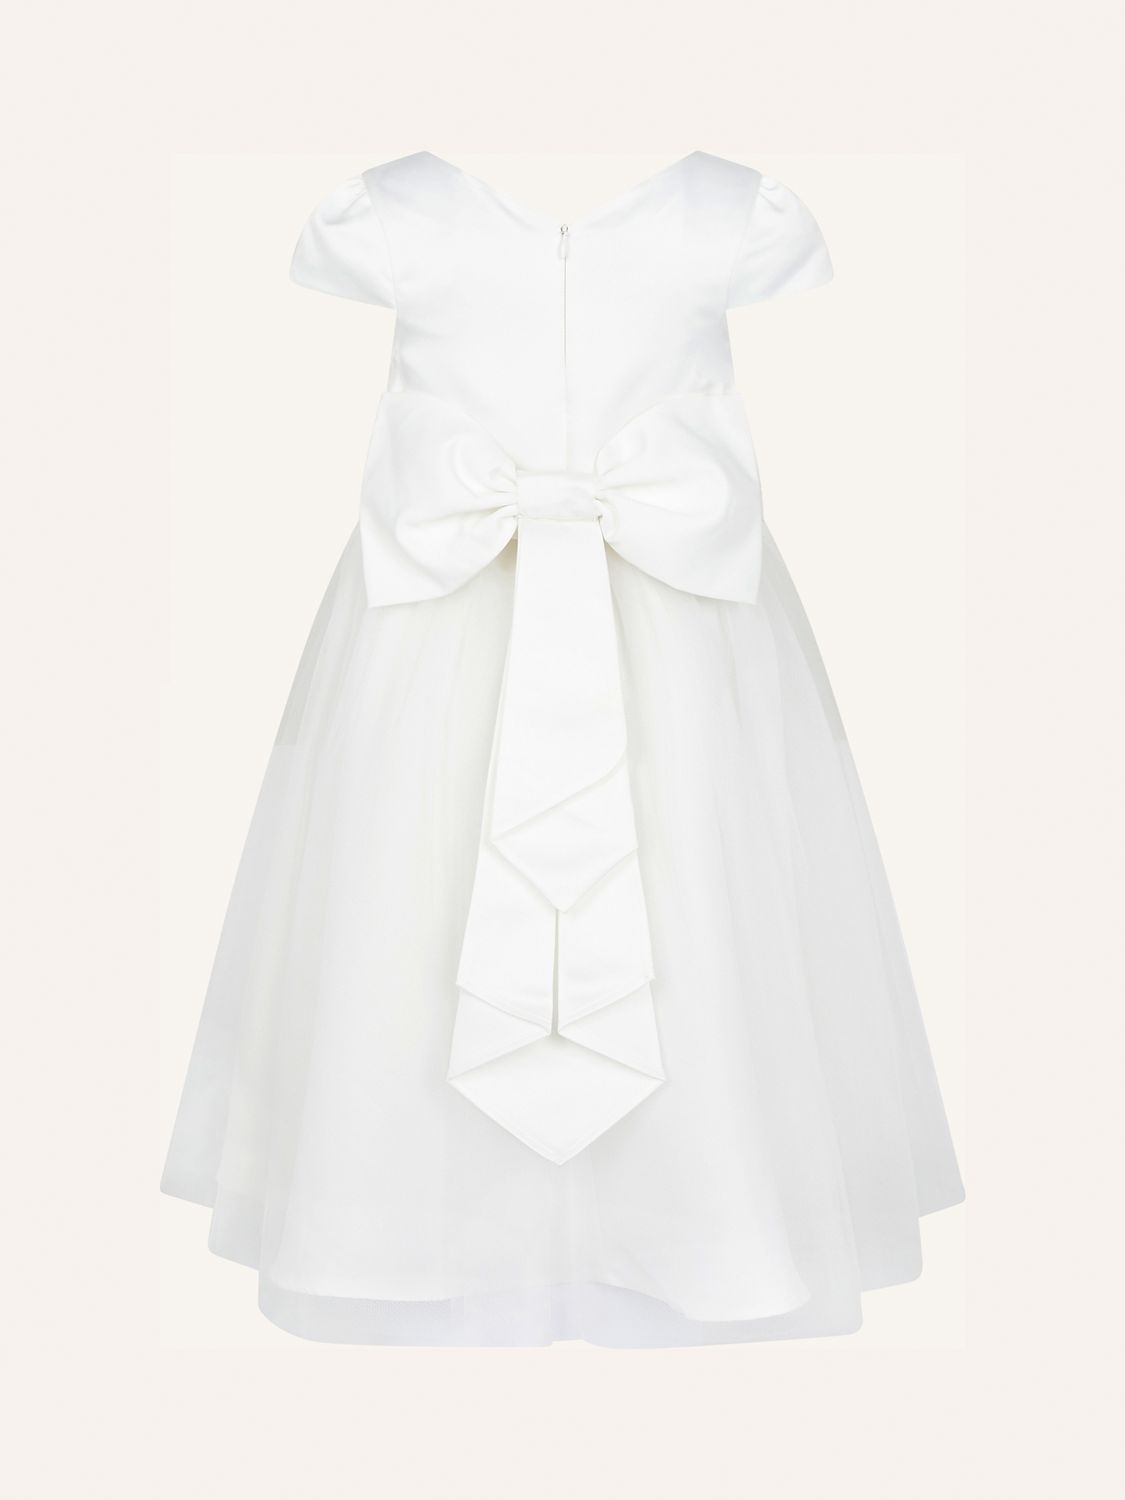 Monsoon Kids' Tulle Bow Bridesmaid Dress, Ivory, 8 years